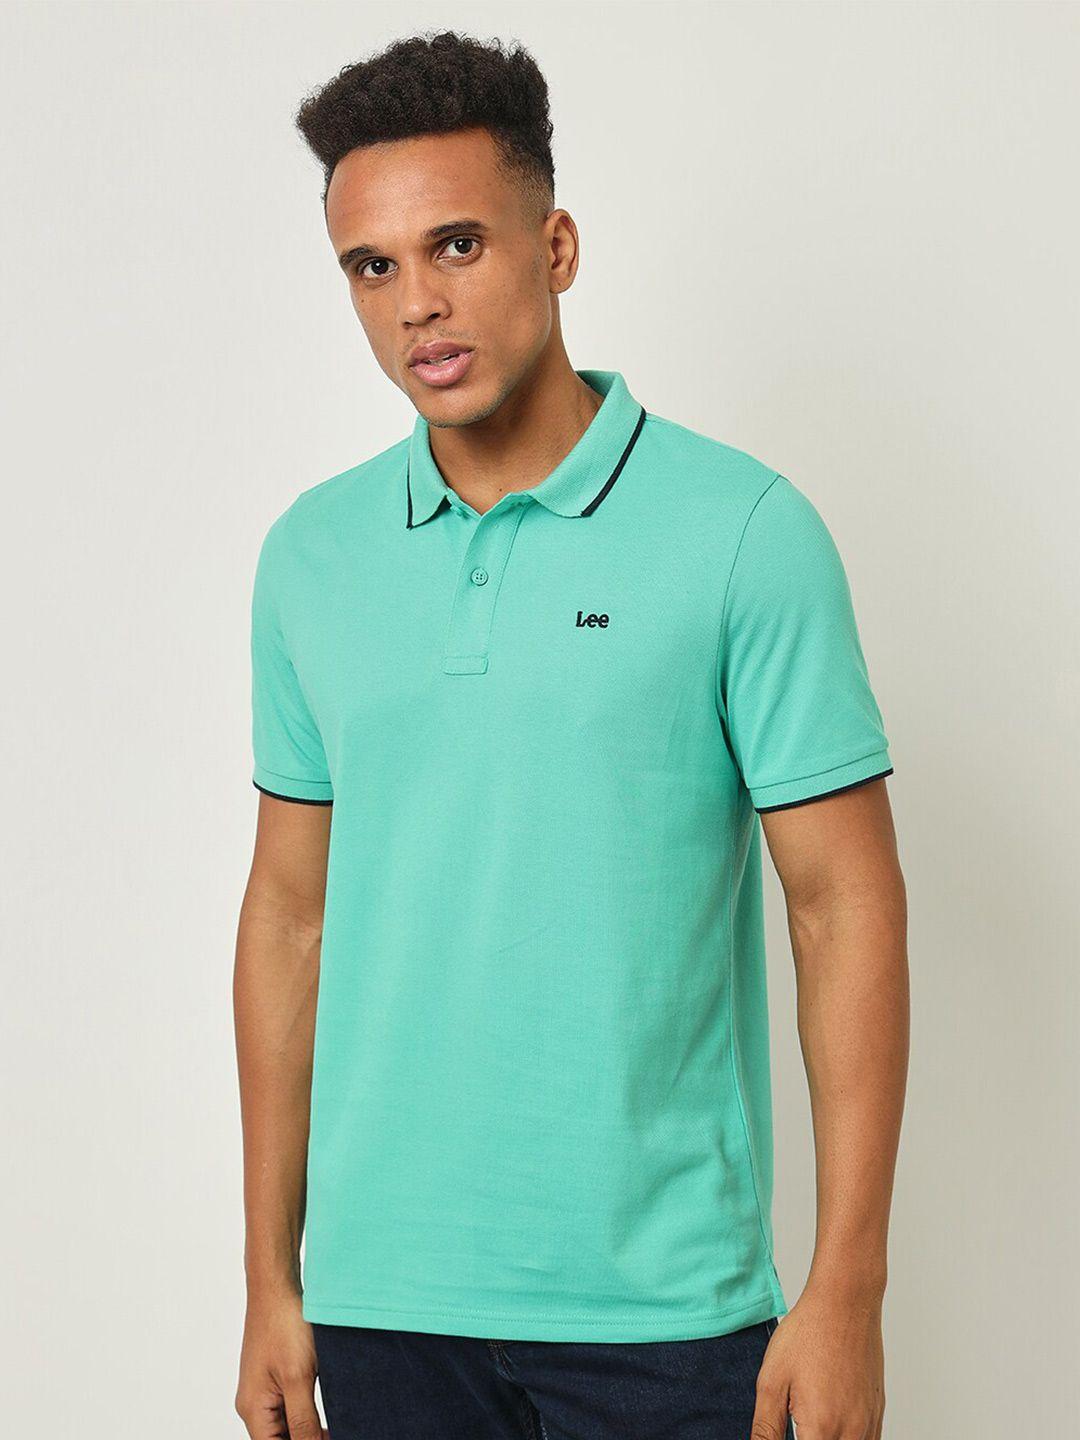 lee polo collar slim fit cotton t-shirt